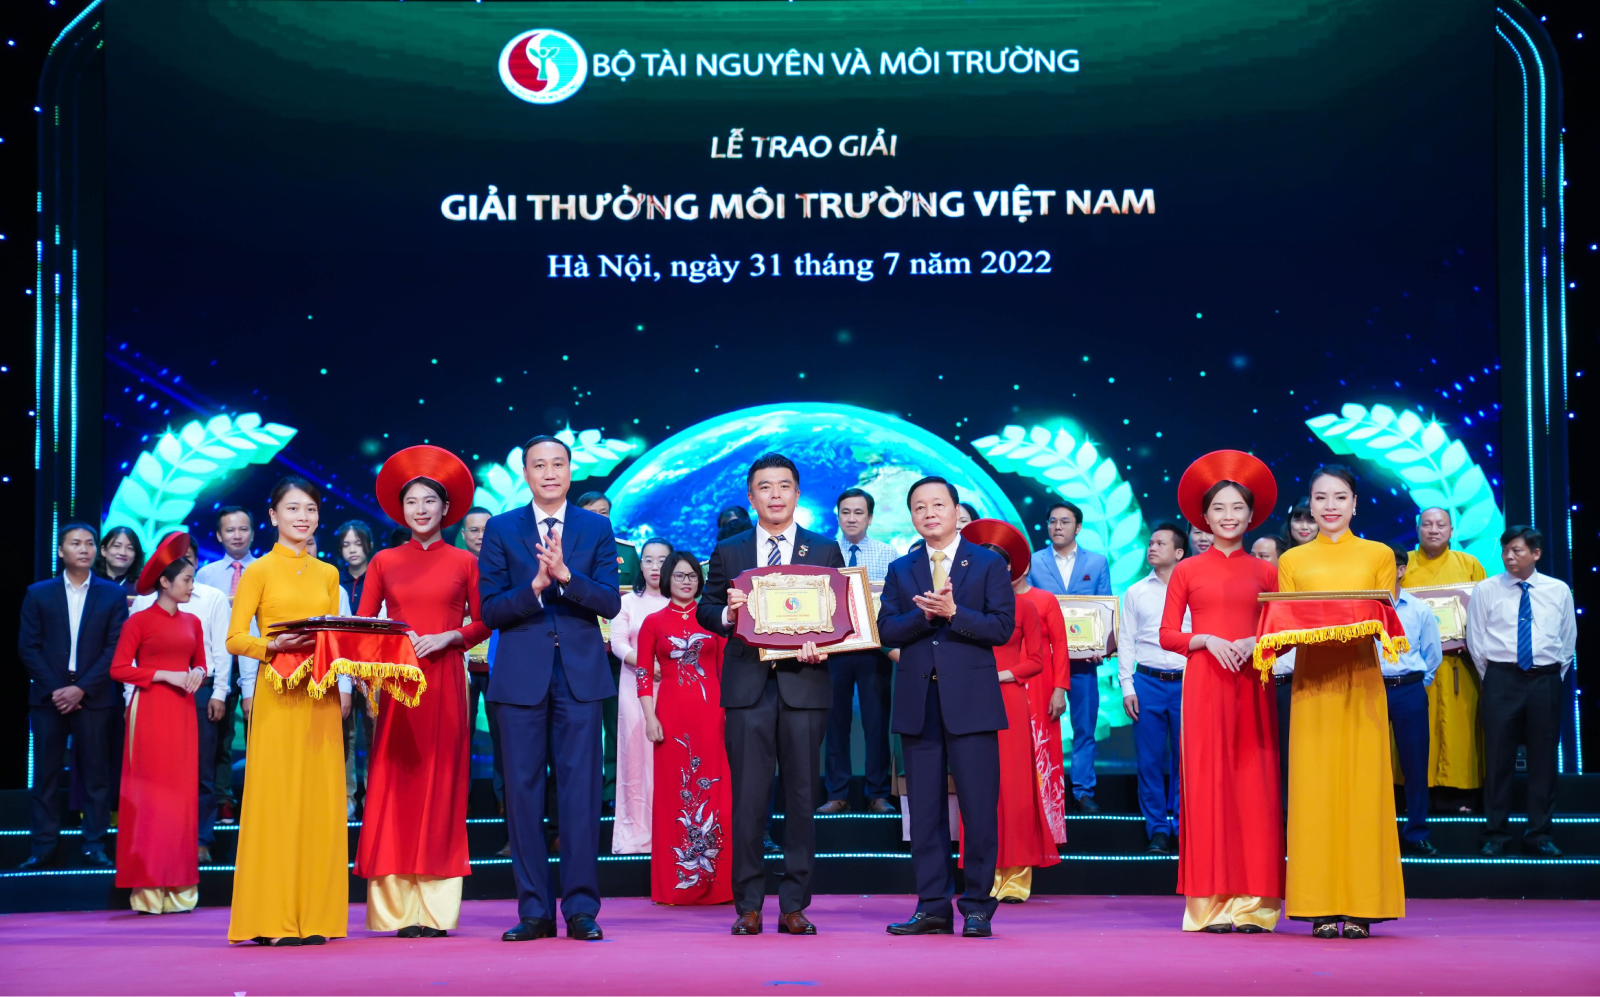 Photo: Panasonic was officially honored with Vietnam National Environment Award for the 3rd time thanks to its tremendous efforts and contributions for environment in Vietnam